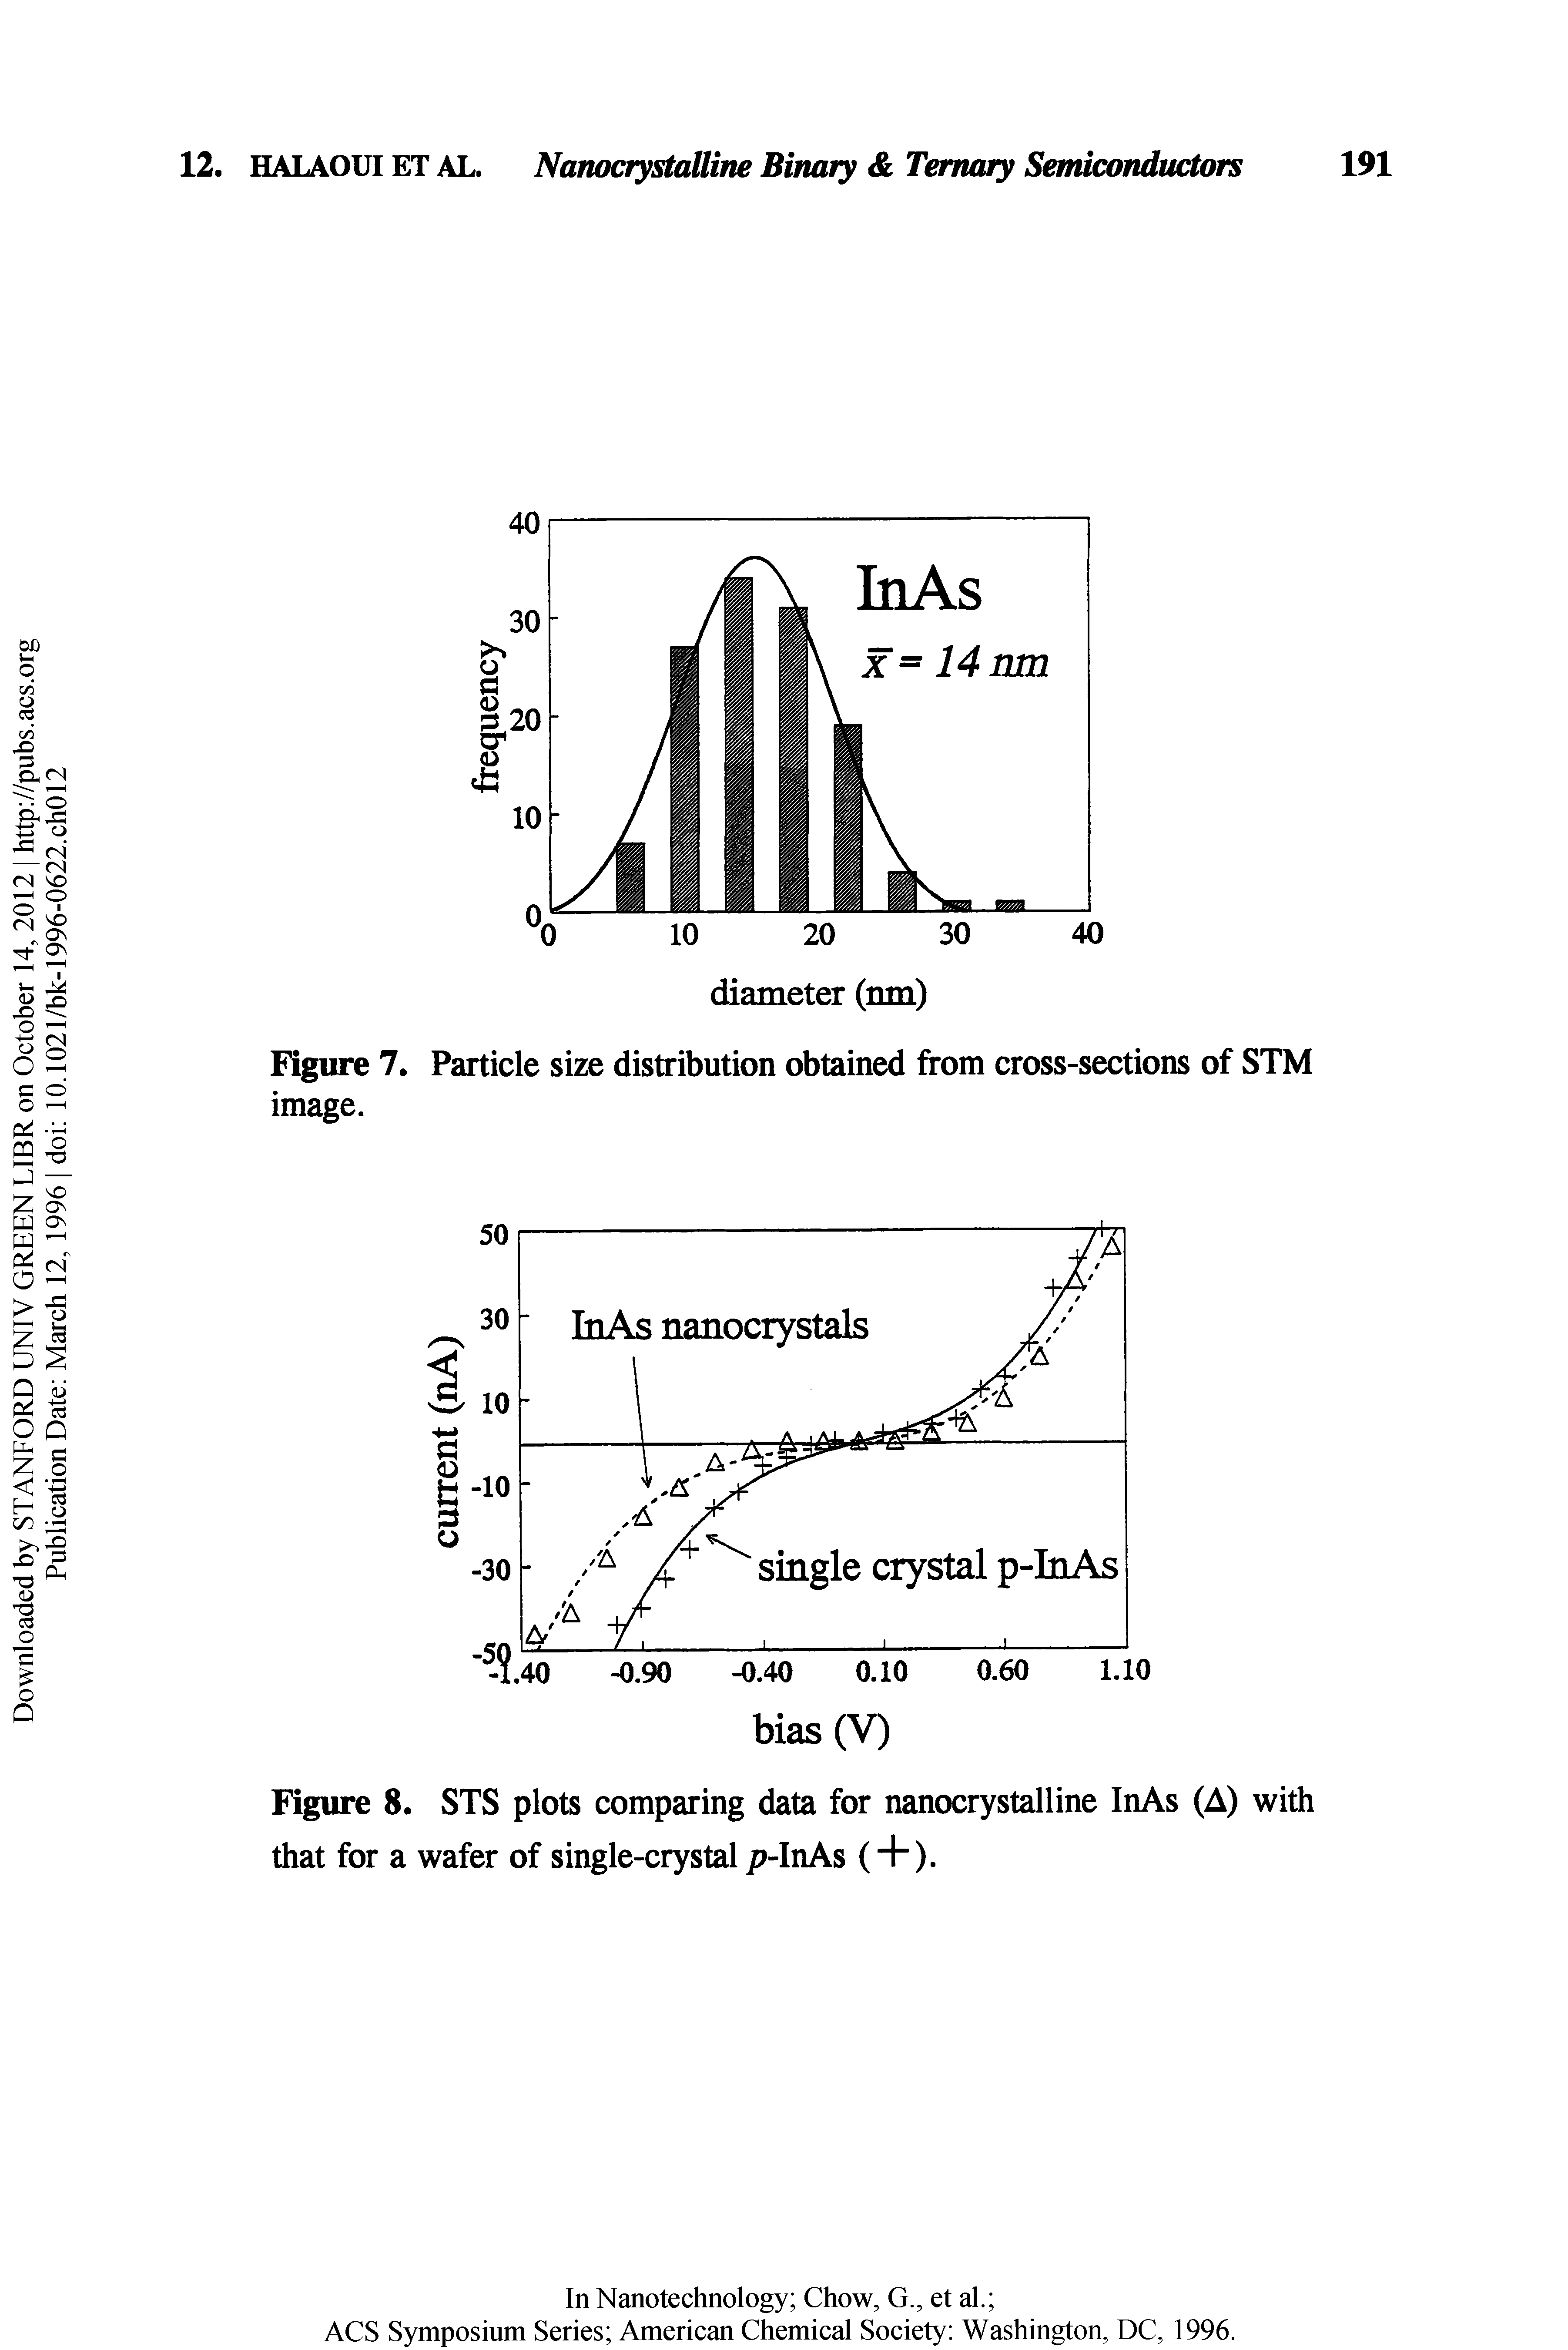 Figure 7. Particle size distribution obtained from cross-sections of STM image.